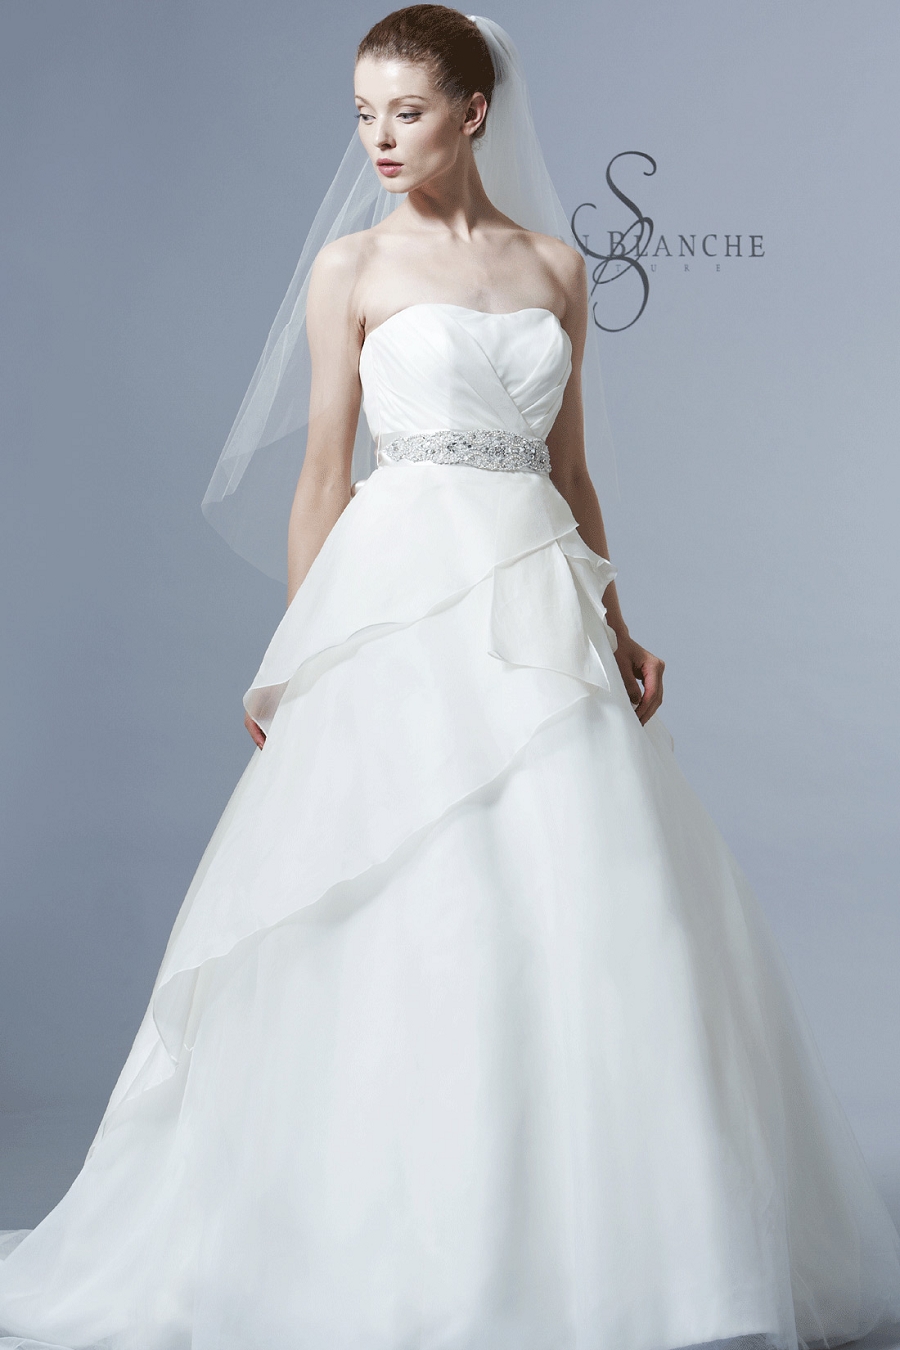 Blog of Wedding and Occasion Wear: 2014 Fairy Tale Wedding Dresses——To